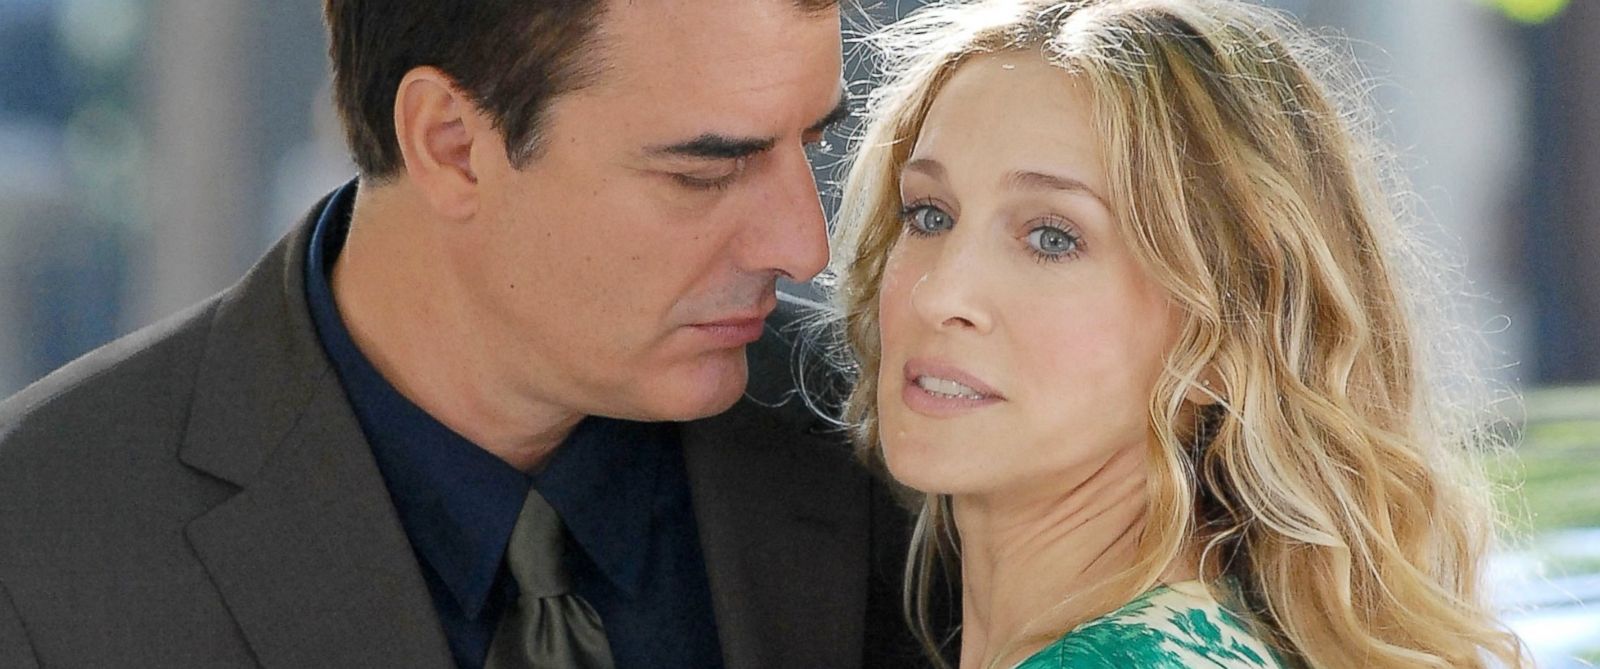 Sex And The Citys Chris Noth Slams The Shows Carrie Bradshaw Abc News 2403